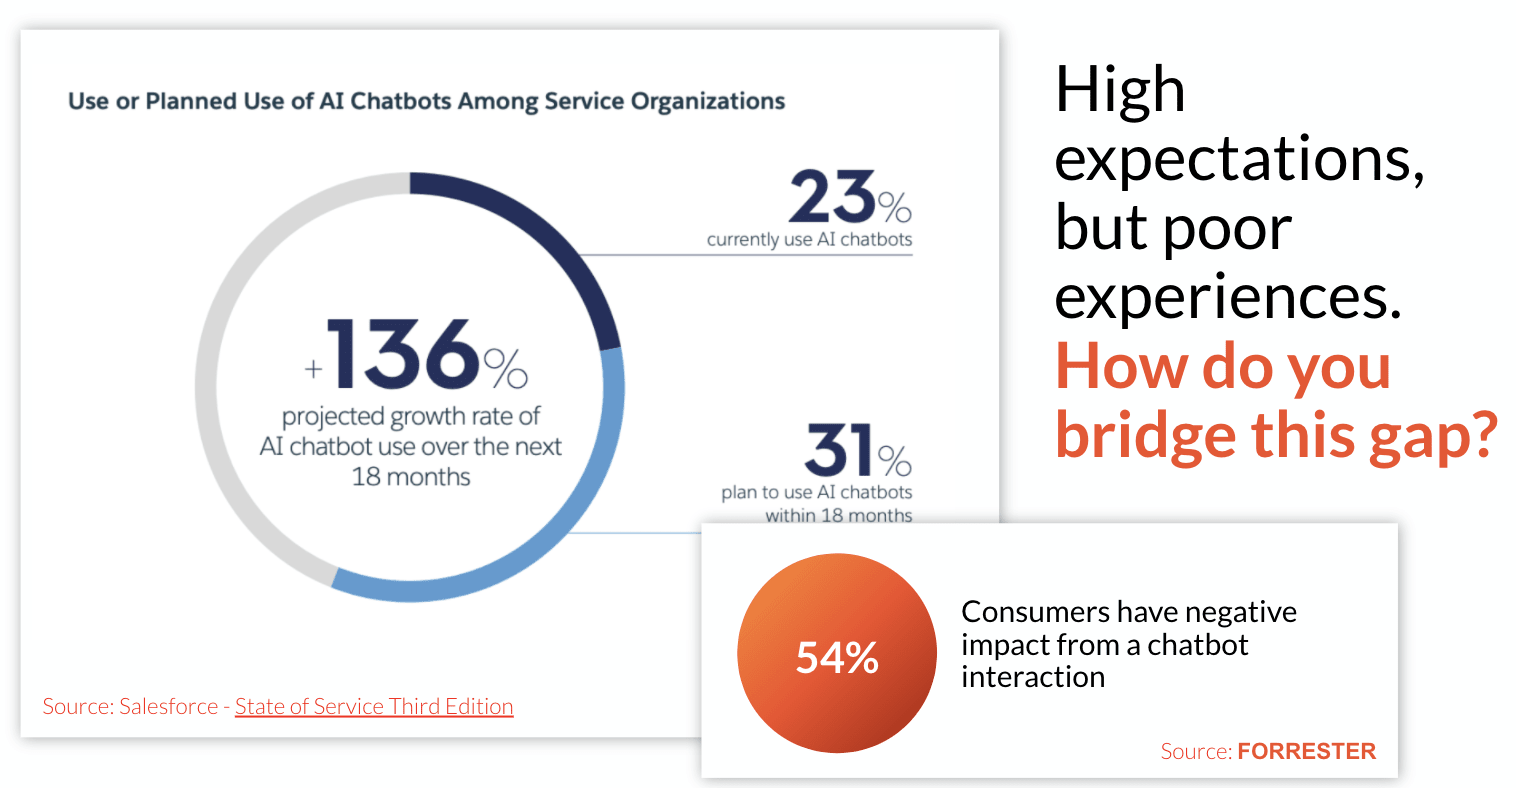 high customer expectation for omnichannel customer service